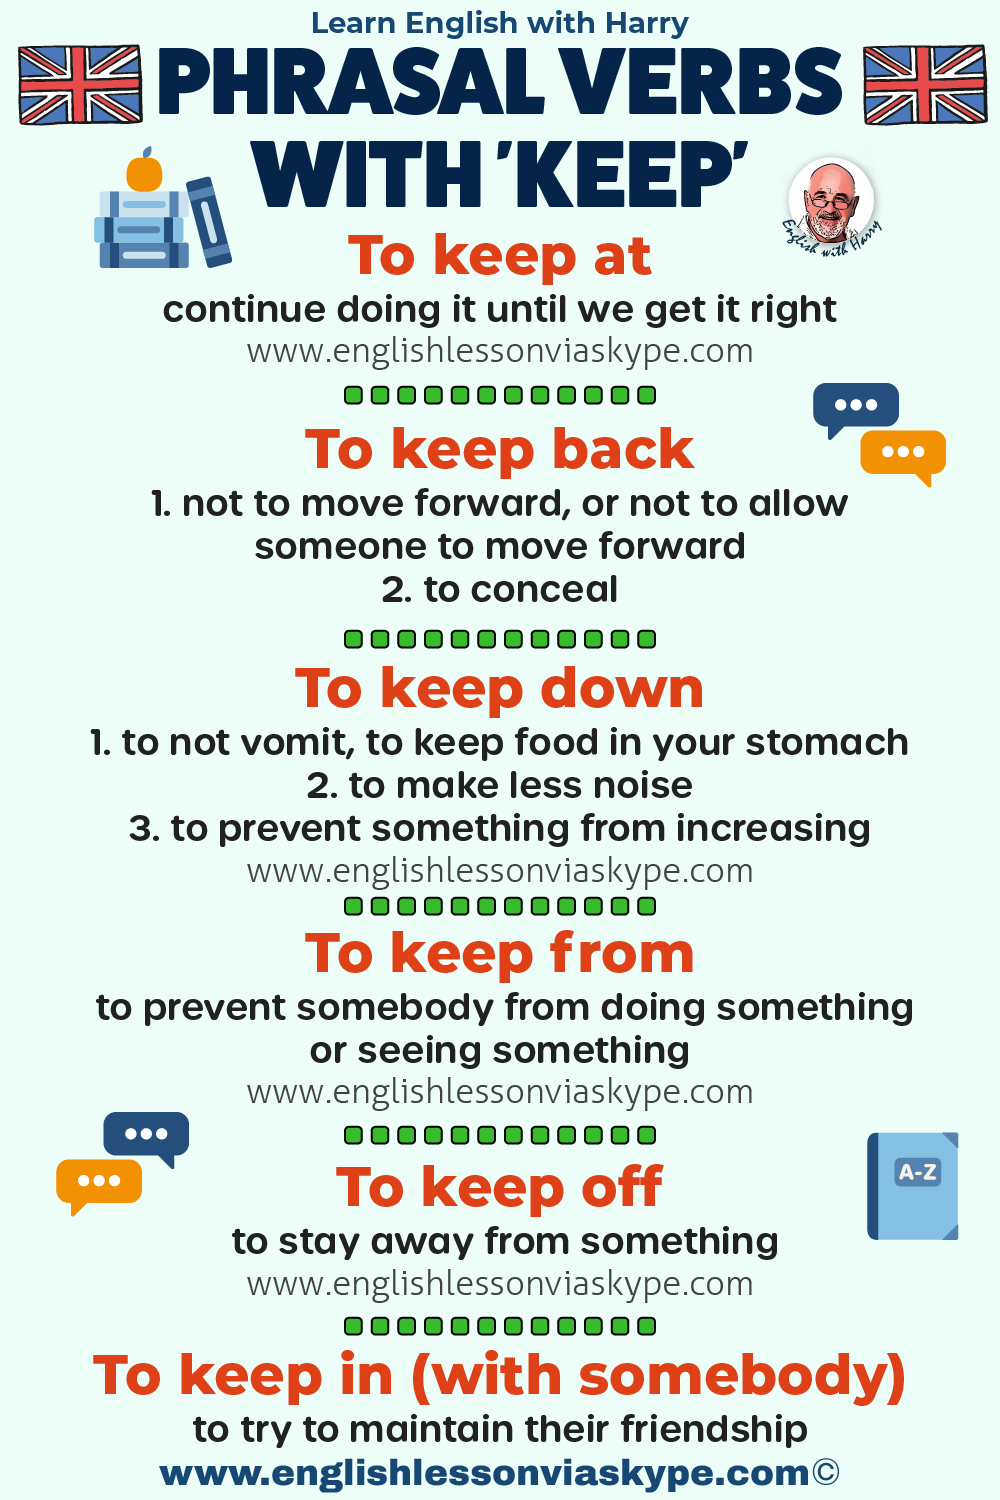 phrasal-verbs-with-keep-speak-better-english-with-harry